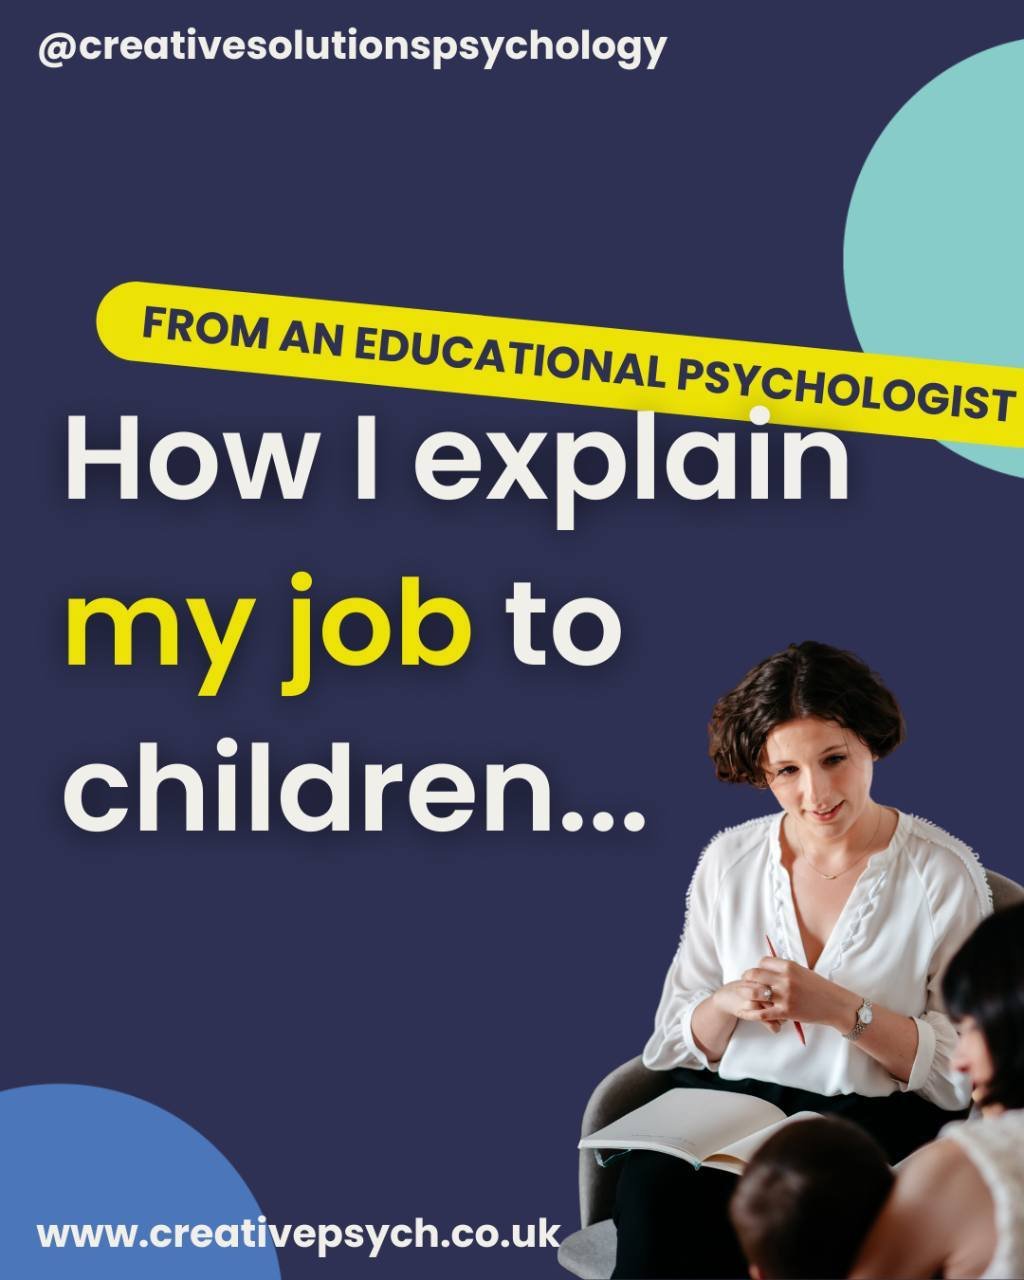 🌈📘 As a child and educational psychologist, explaining my job to children involves simplifying complex concepts into terms they can understand and relate to. 

My goal is to make them feel comfortable and curious about my work and how it might rela